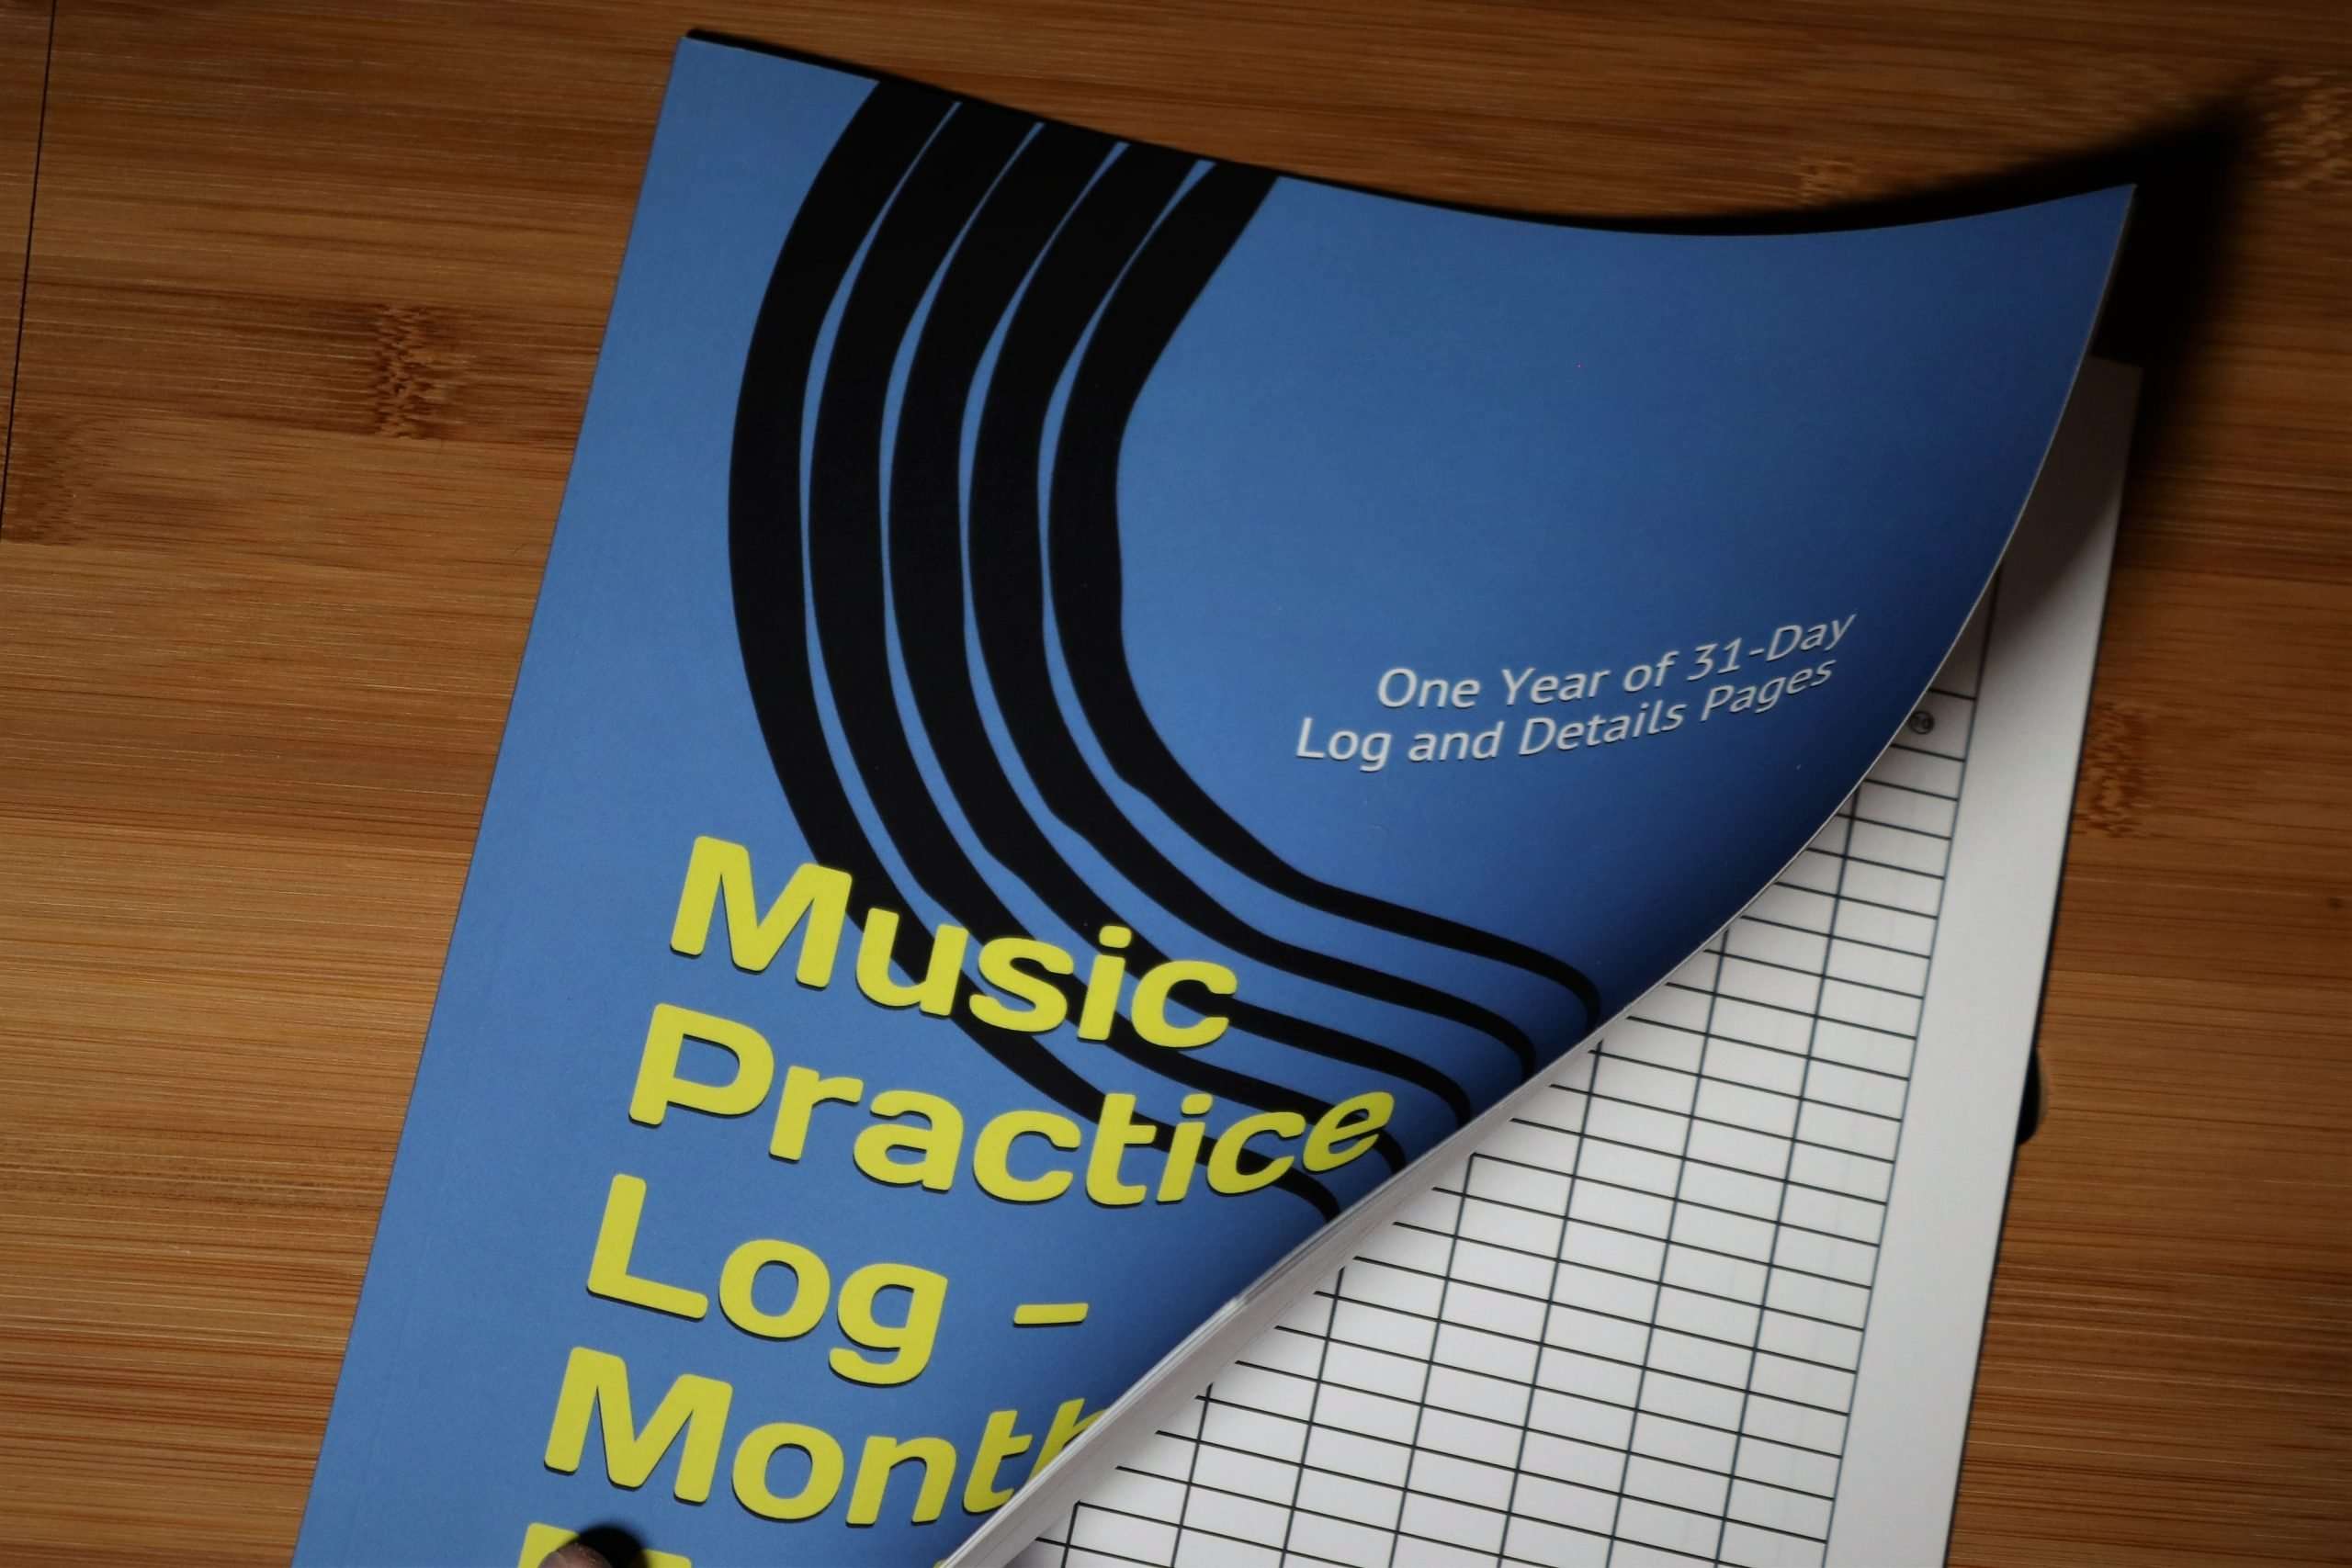 Music Practice Log - Month by Month held open on a desk